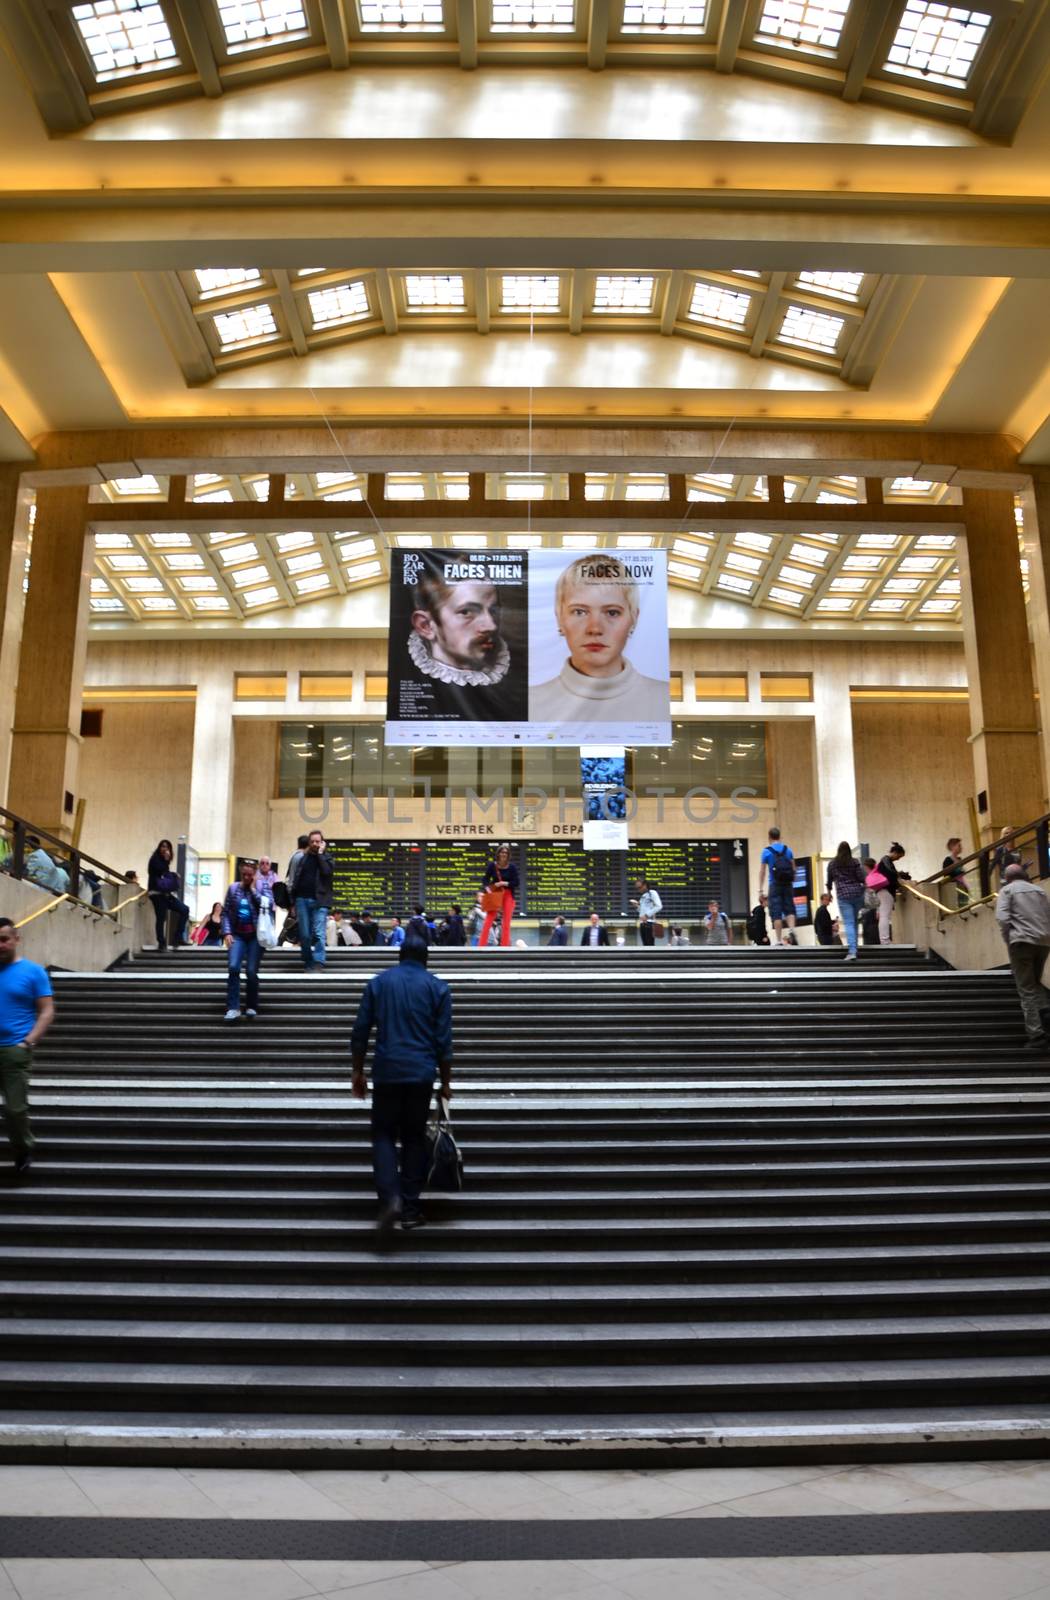 Brussels, Belgium - May 12, 2015: Travellers in the main lobby of Brussels Central Train Station on May 12, 2015 in Brussels , Belgium.